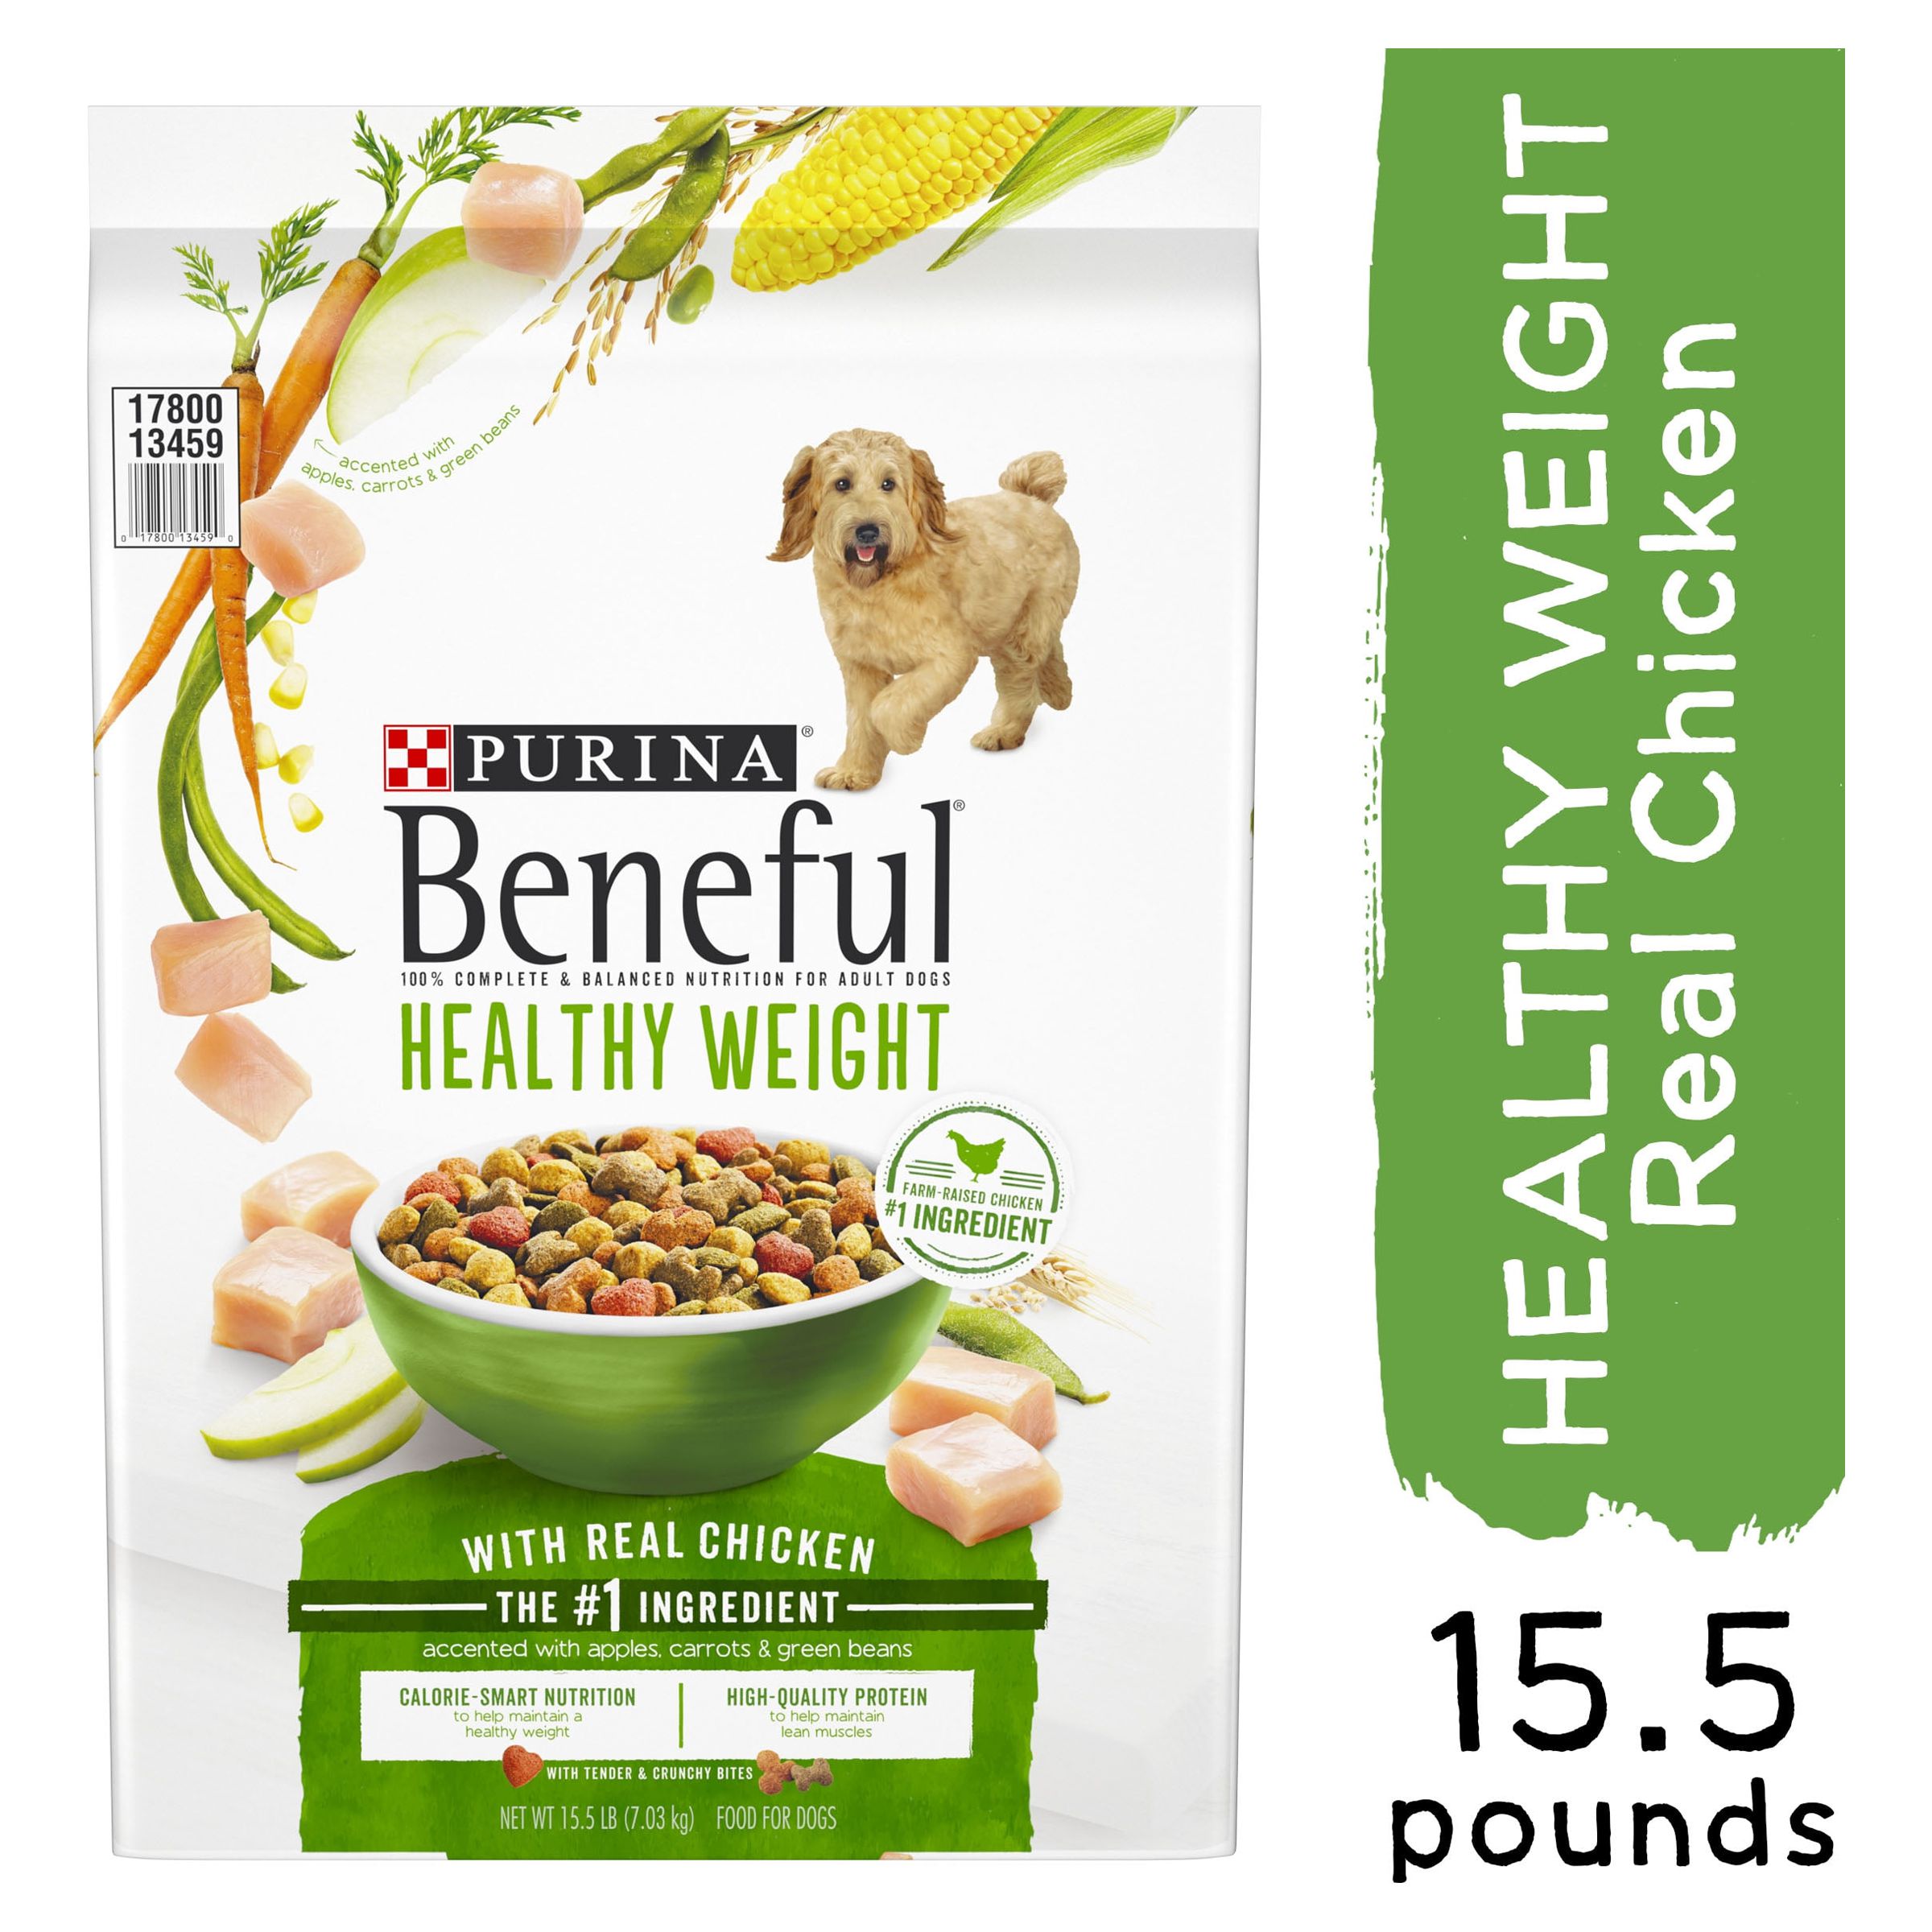 Purina Beneful Healthy Weight Dry Dog Food, Healthy Weight With Farm-Raised Chicken, 15.5 lb. Bag - image 1 of 15